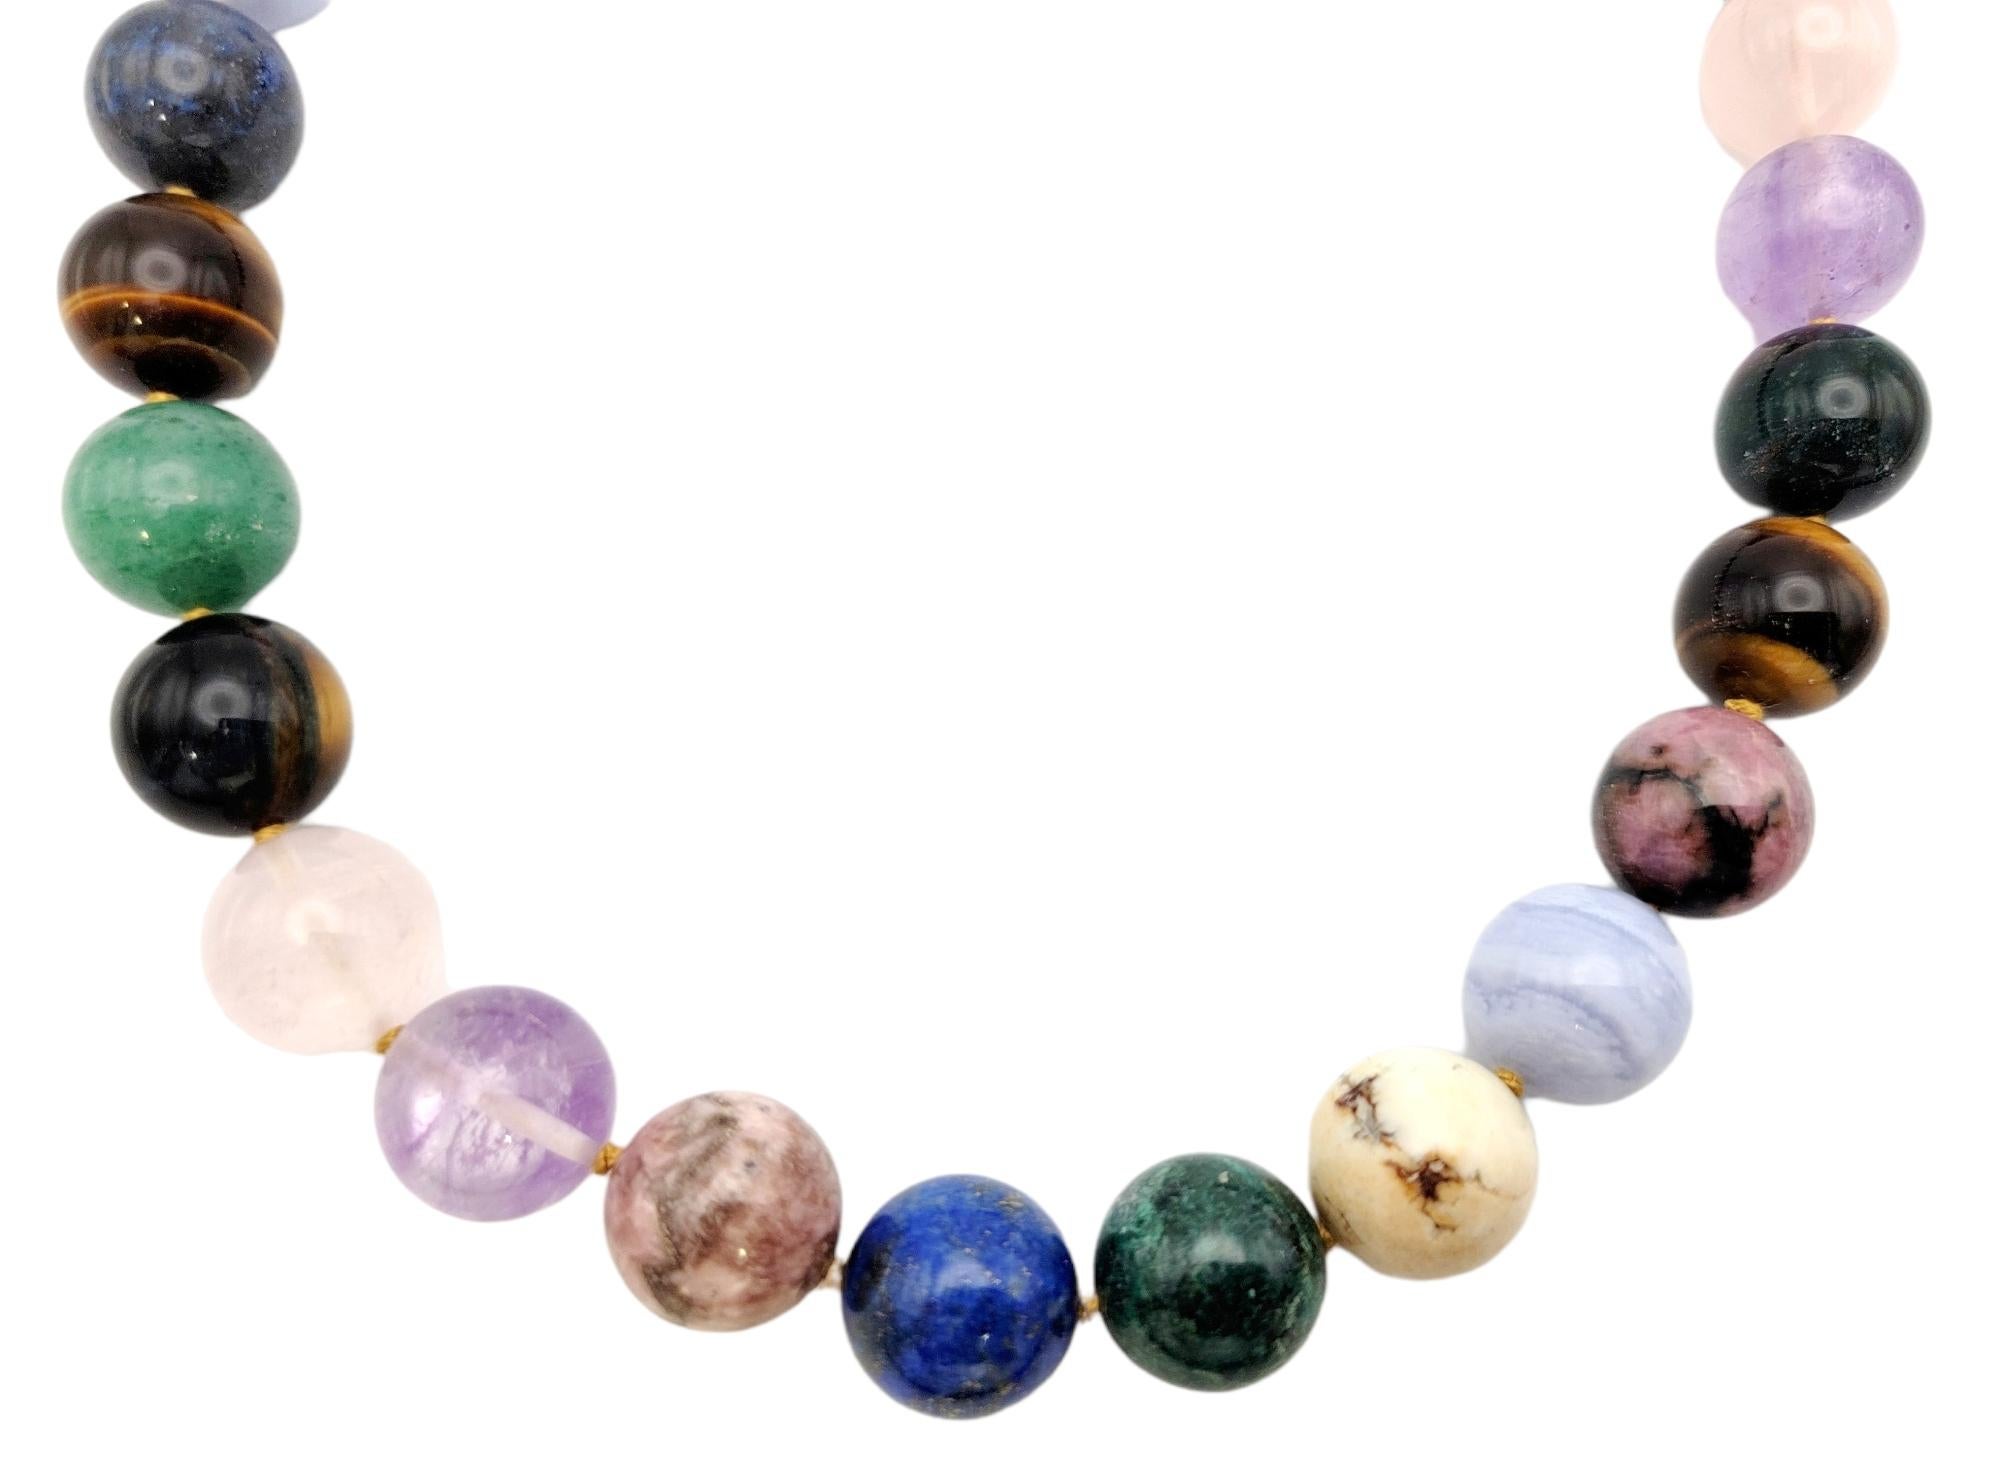 Vibrant multi-gemstone beaded necklace bursting with color. This amazing rare Paloma Picasso piece from Tiffany & Co. absolutely lights up the neck! Featuring 27 assorted round polished gemstones in shades of pink, blue, purple, orange, brown and